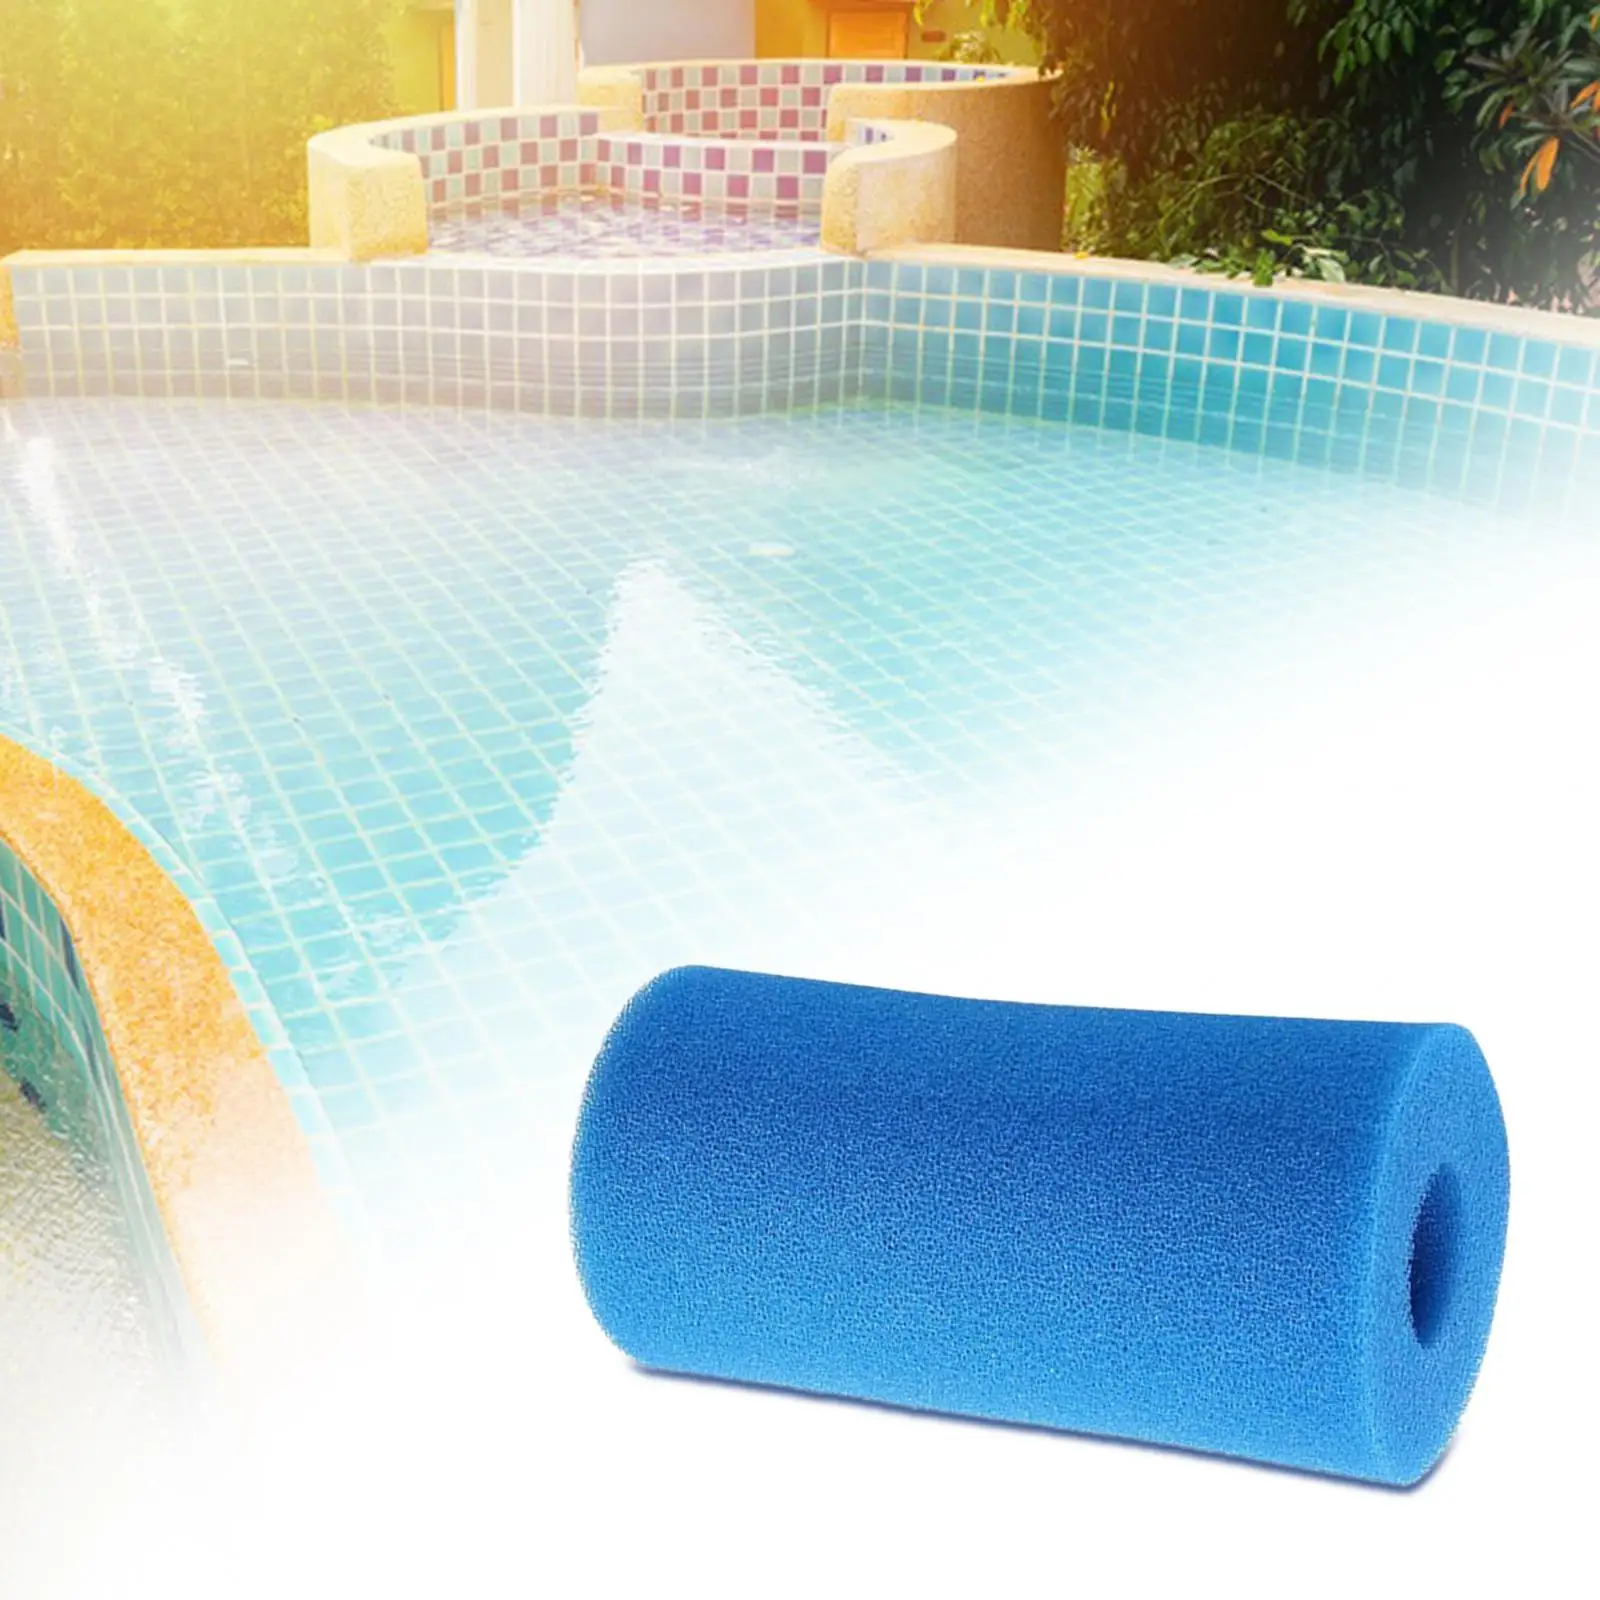 Pool Filter Cartridge Directly Replace Swimming Pool Filter Foam for Type B